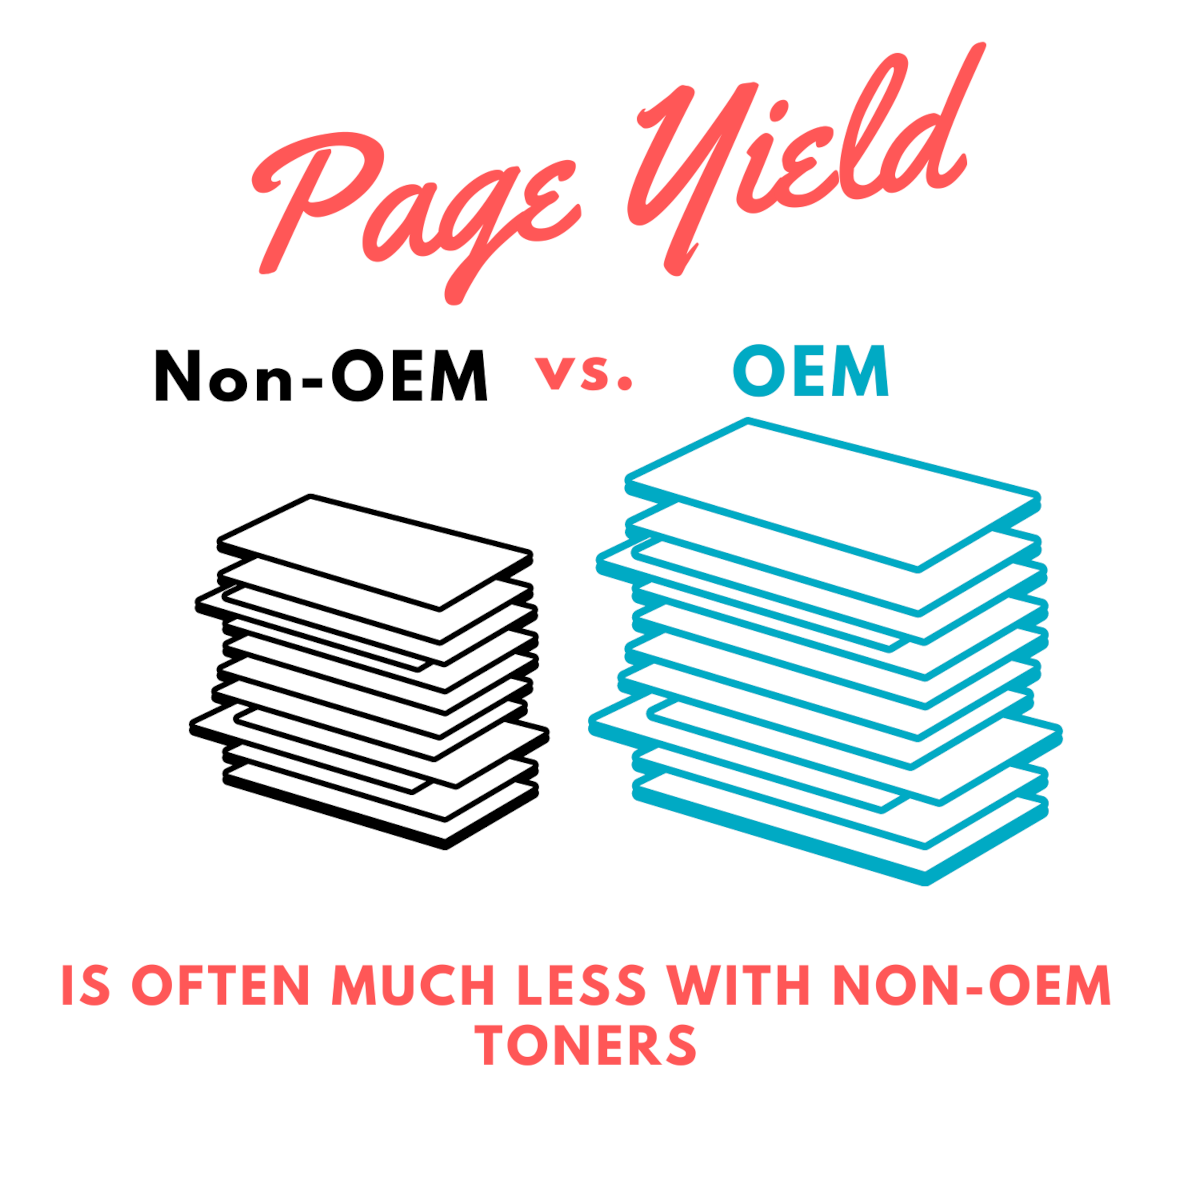 A graphic for Non-OEM vs. OEM, with the text 'Page Yield is often much less with non-OEM toners'.